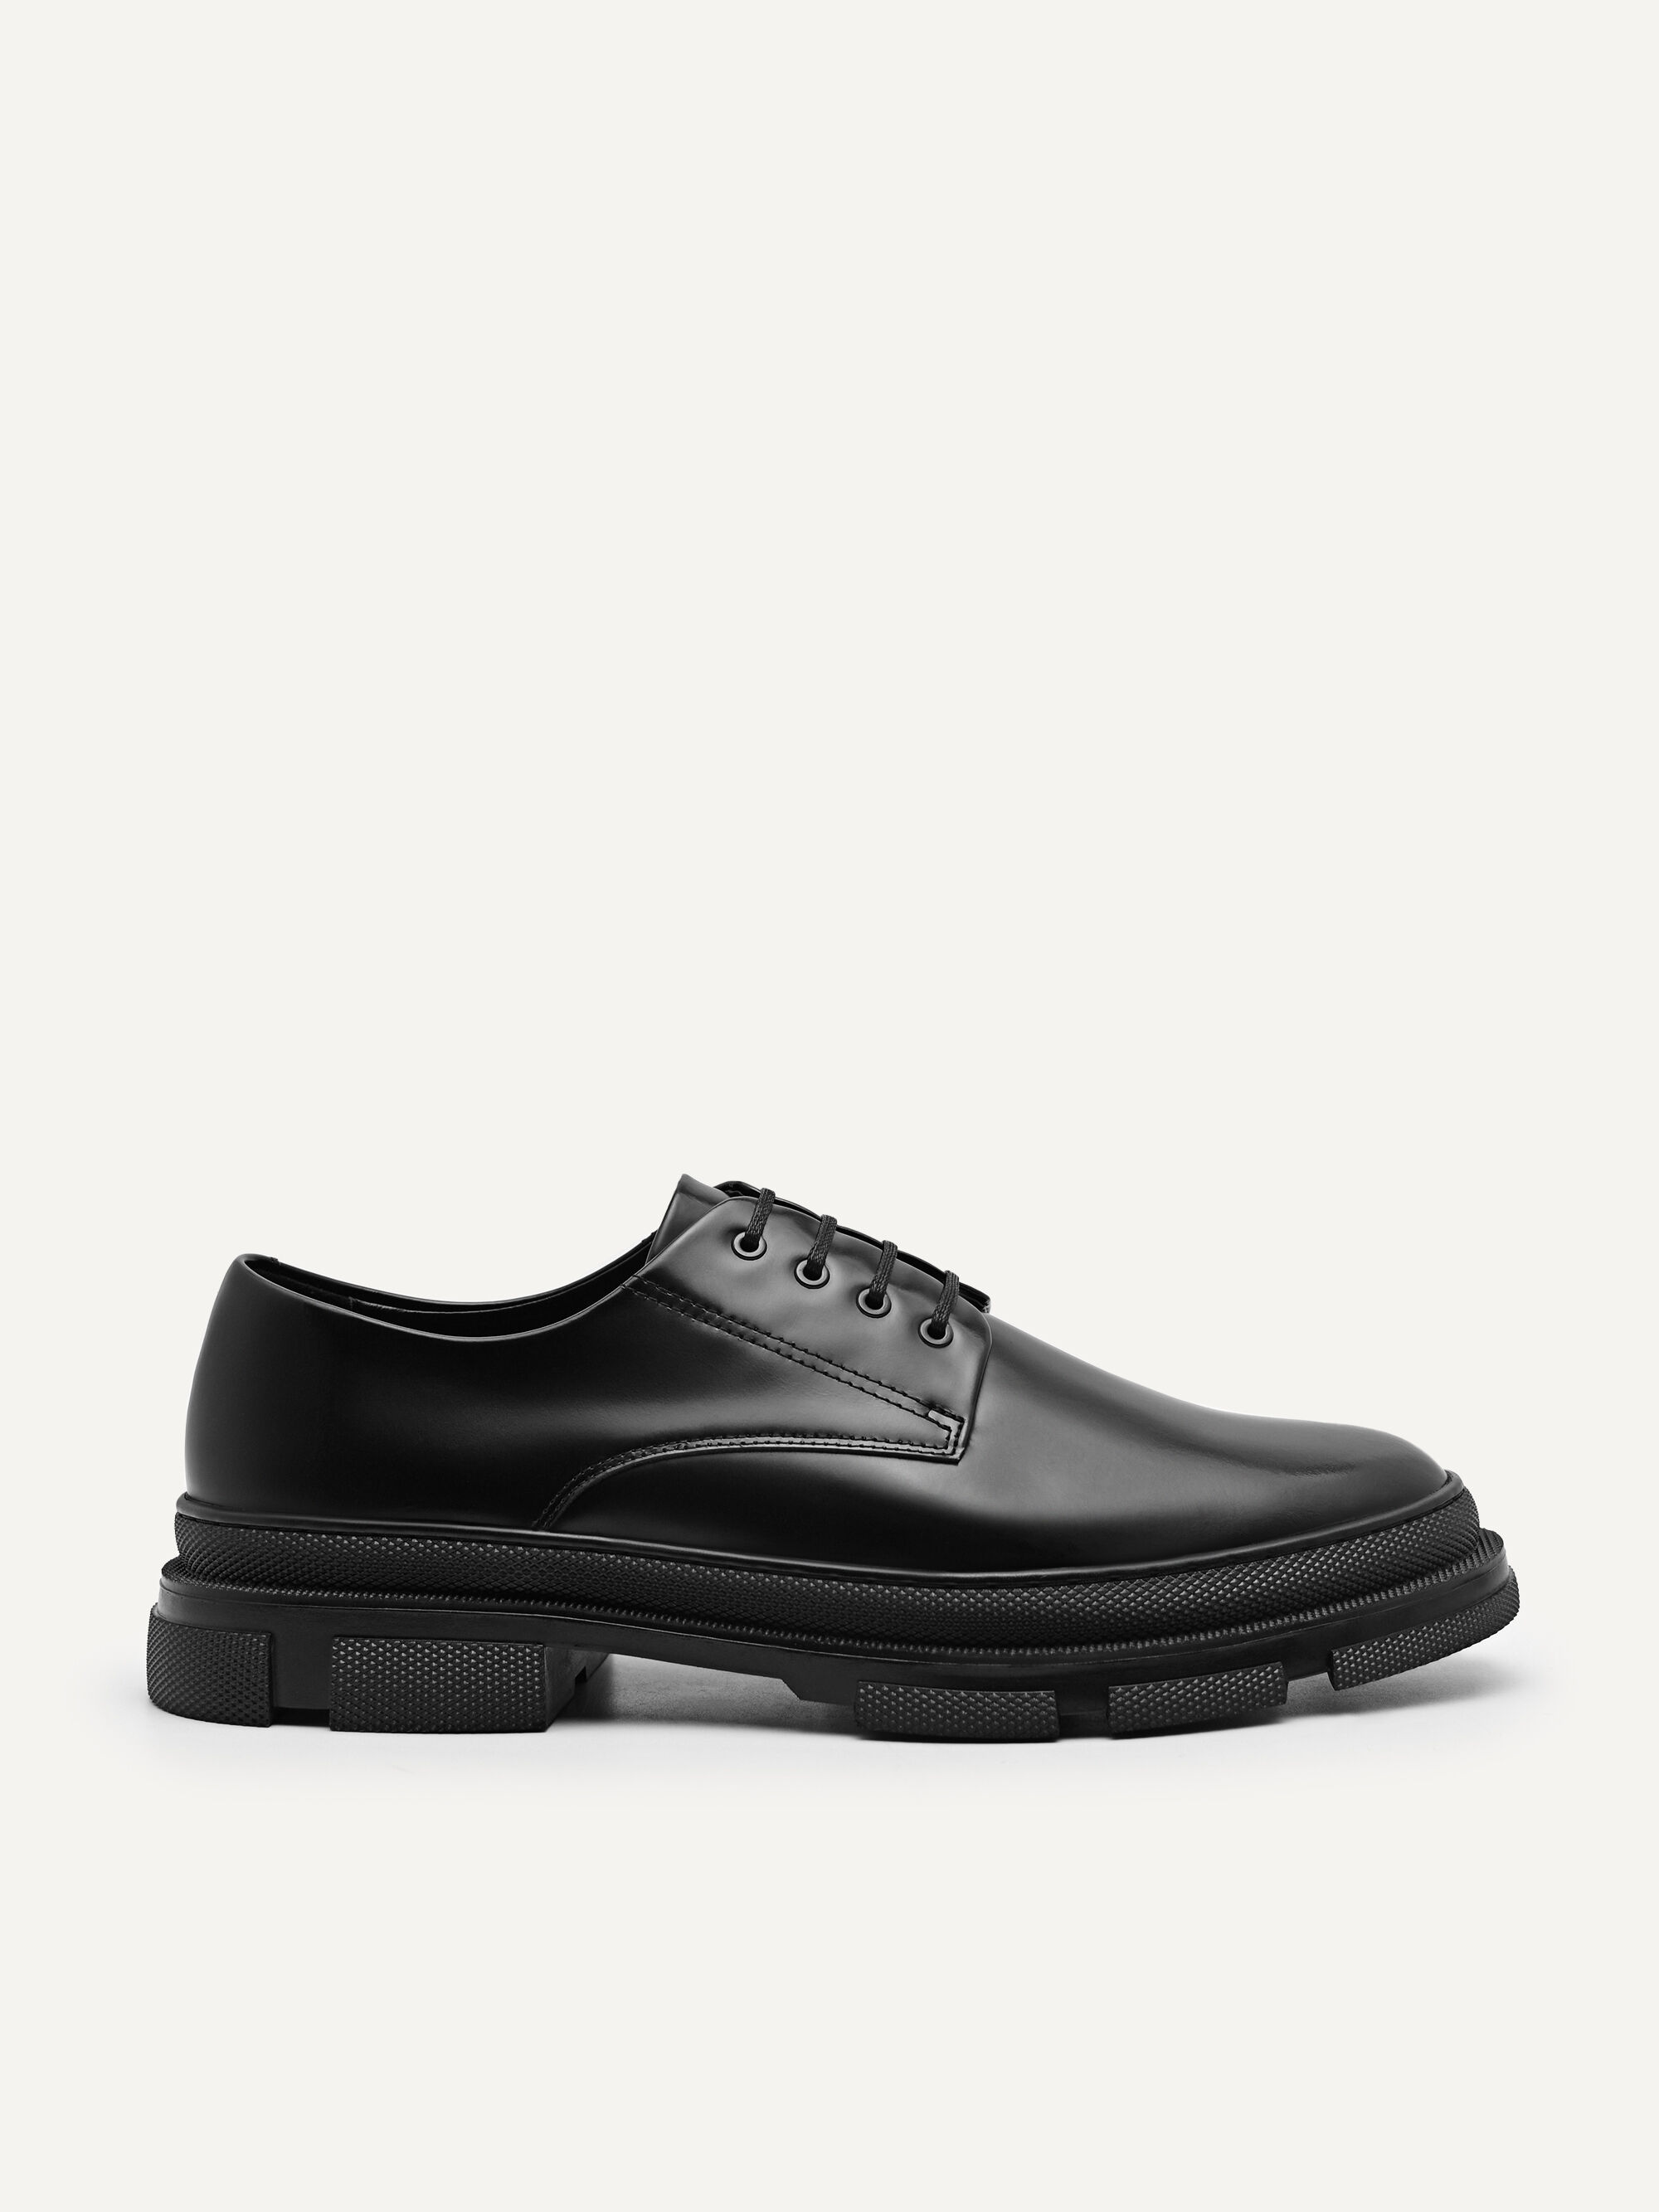 PONCE Black Chunky Sole Lace Up Sneaker | Men's Sneakers – Steve Madden